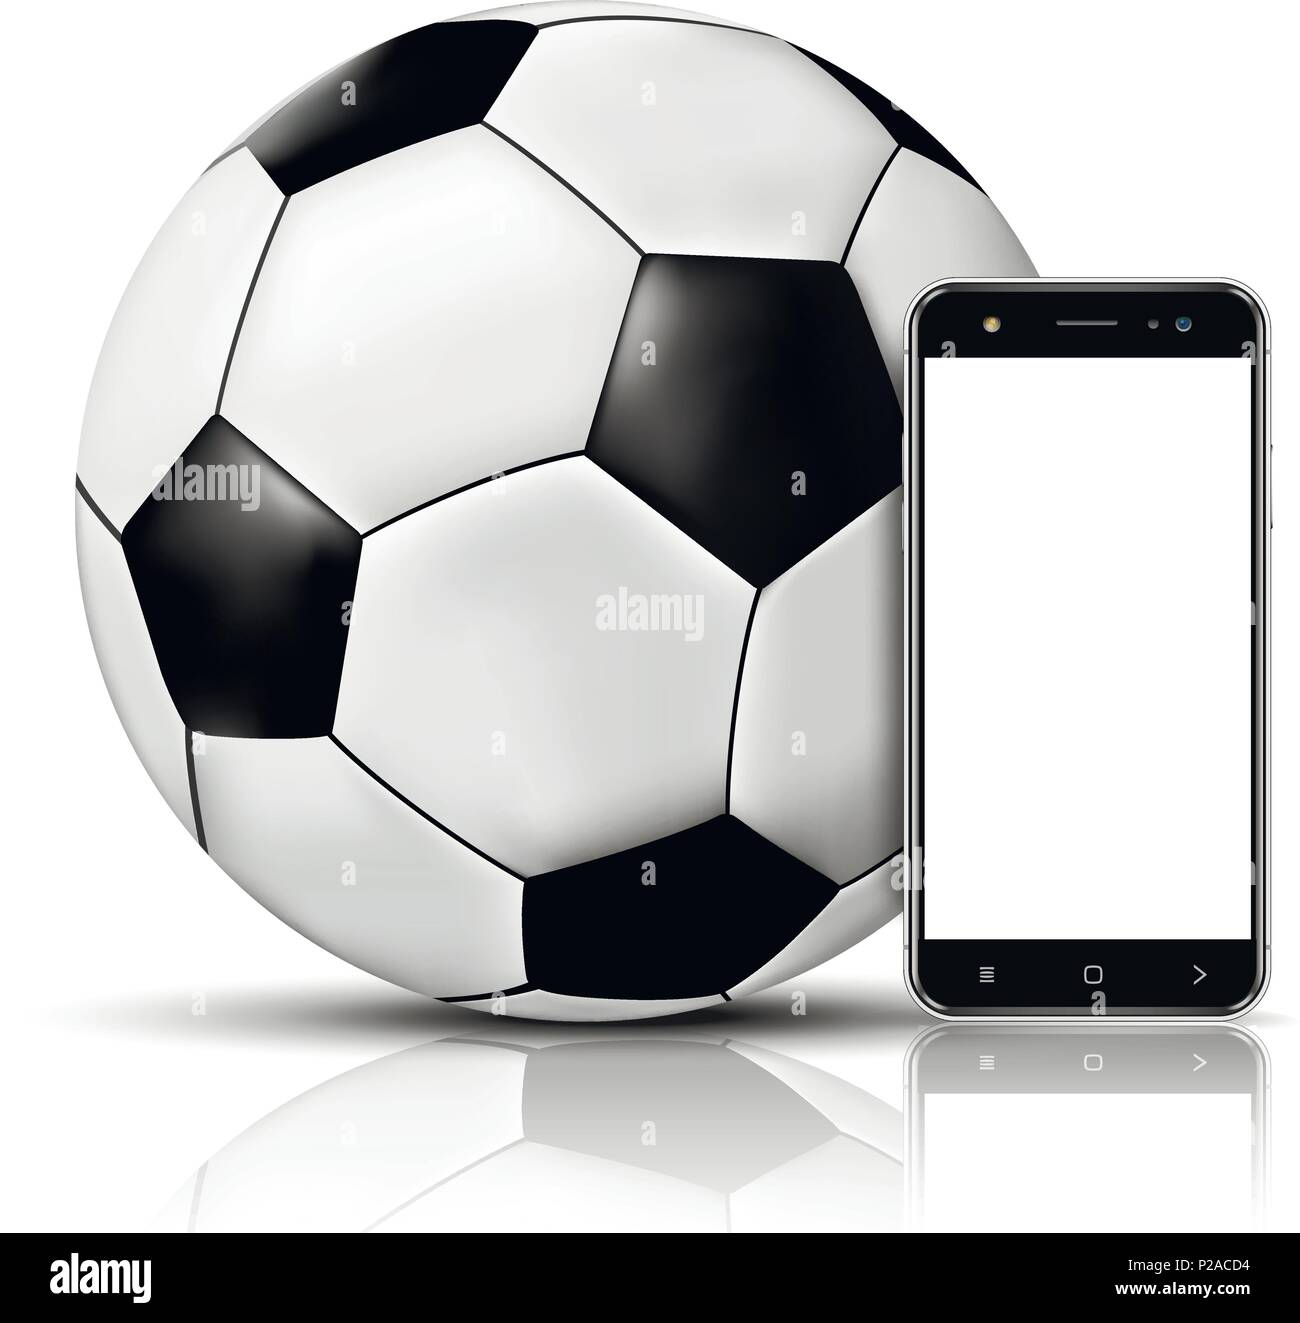 Soccer ball and smartphone with blank screen. Vector illustration. Stock Vector